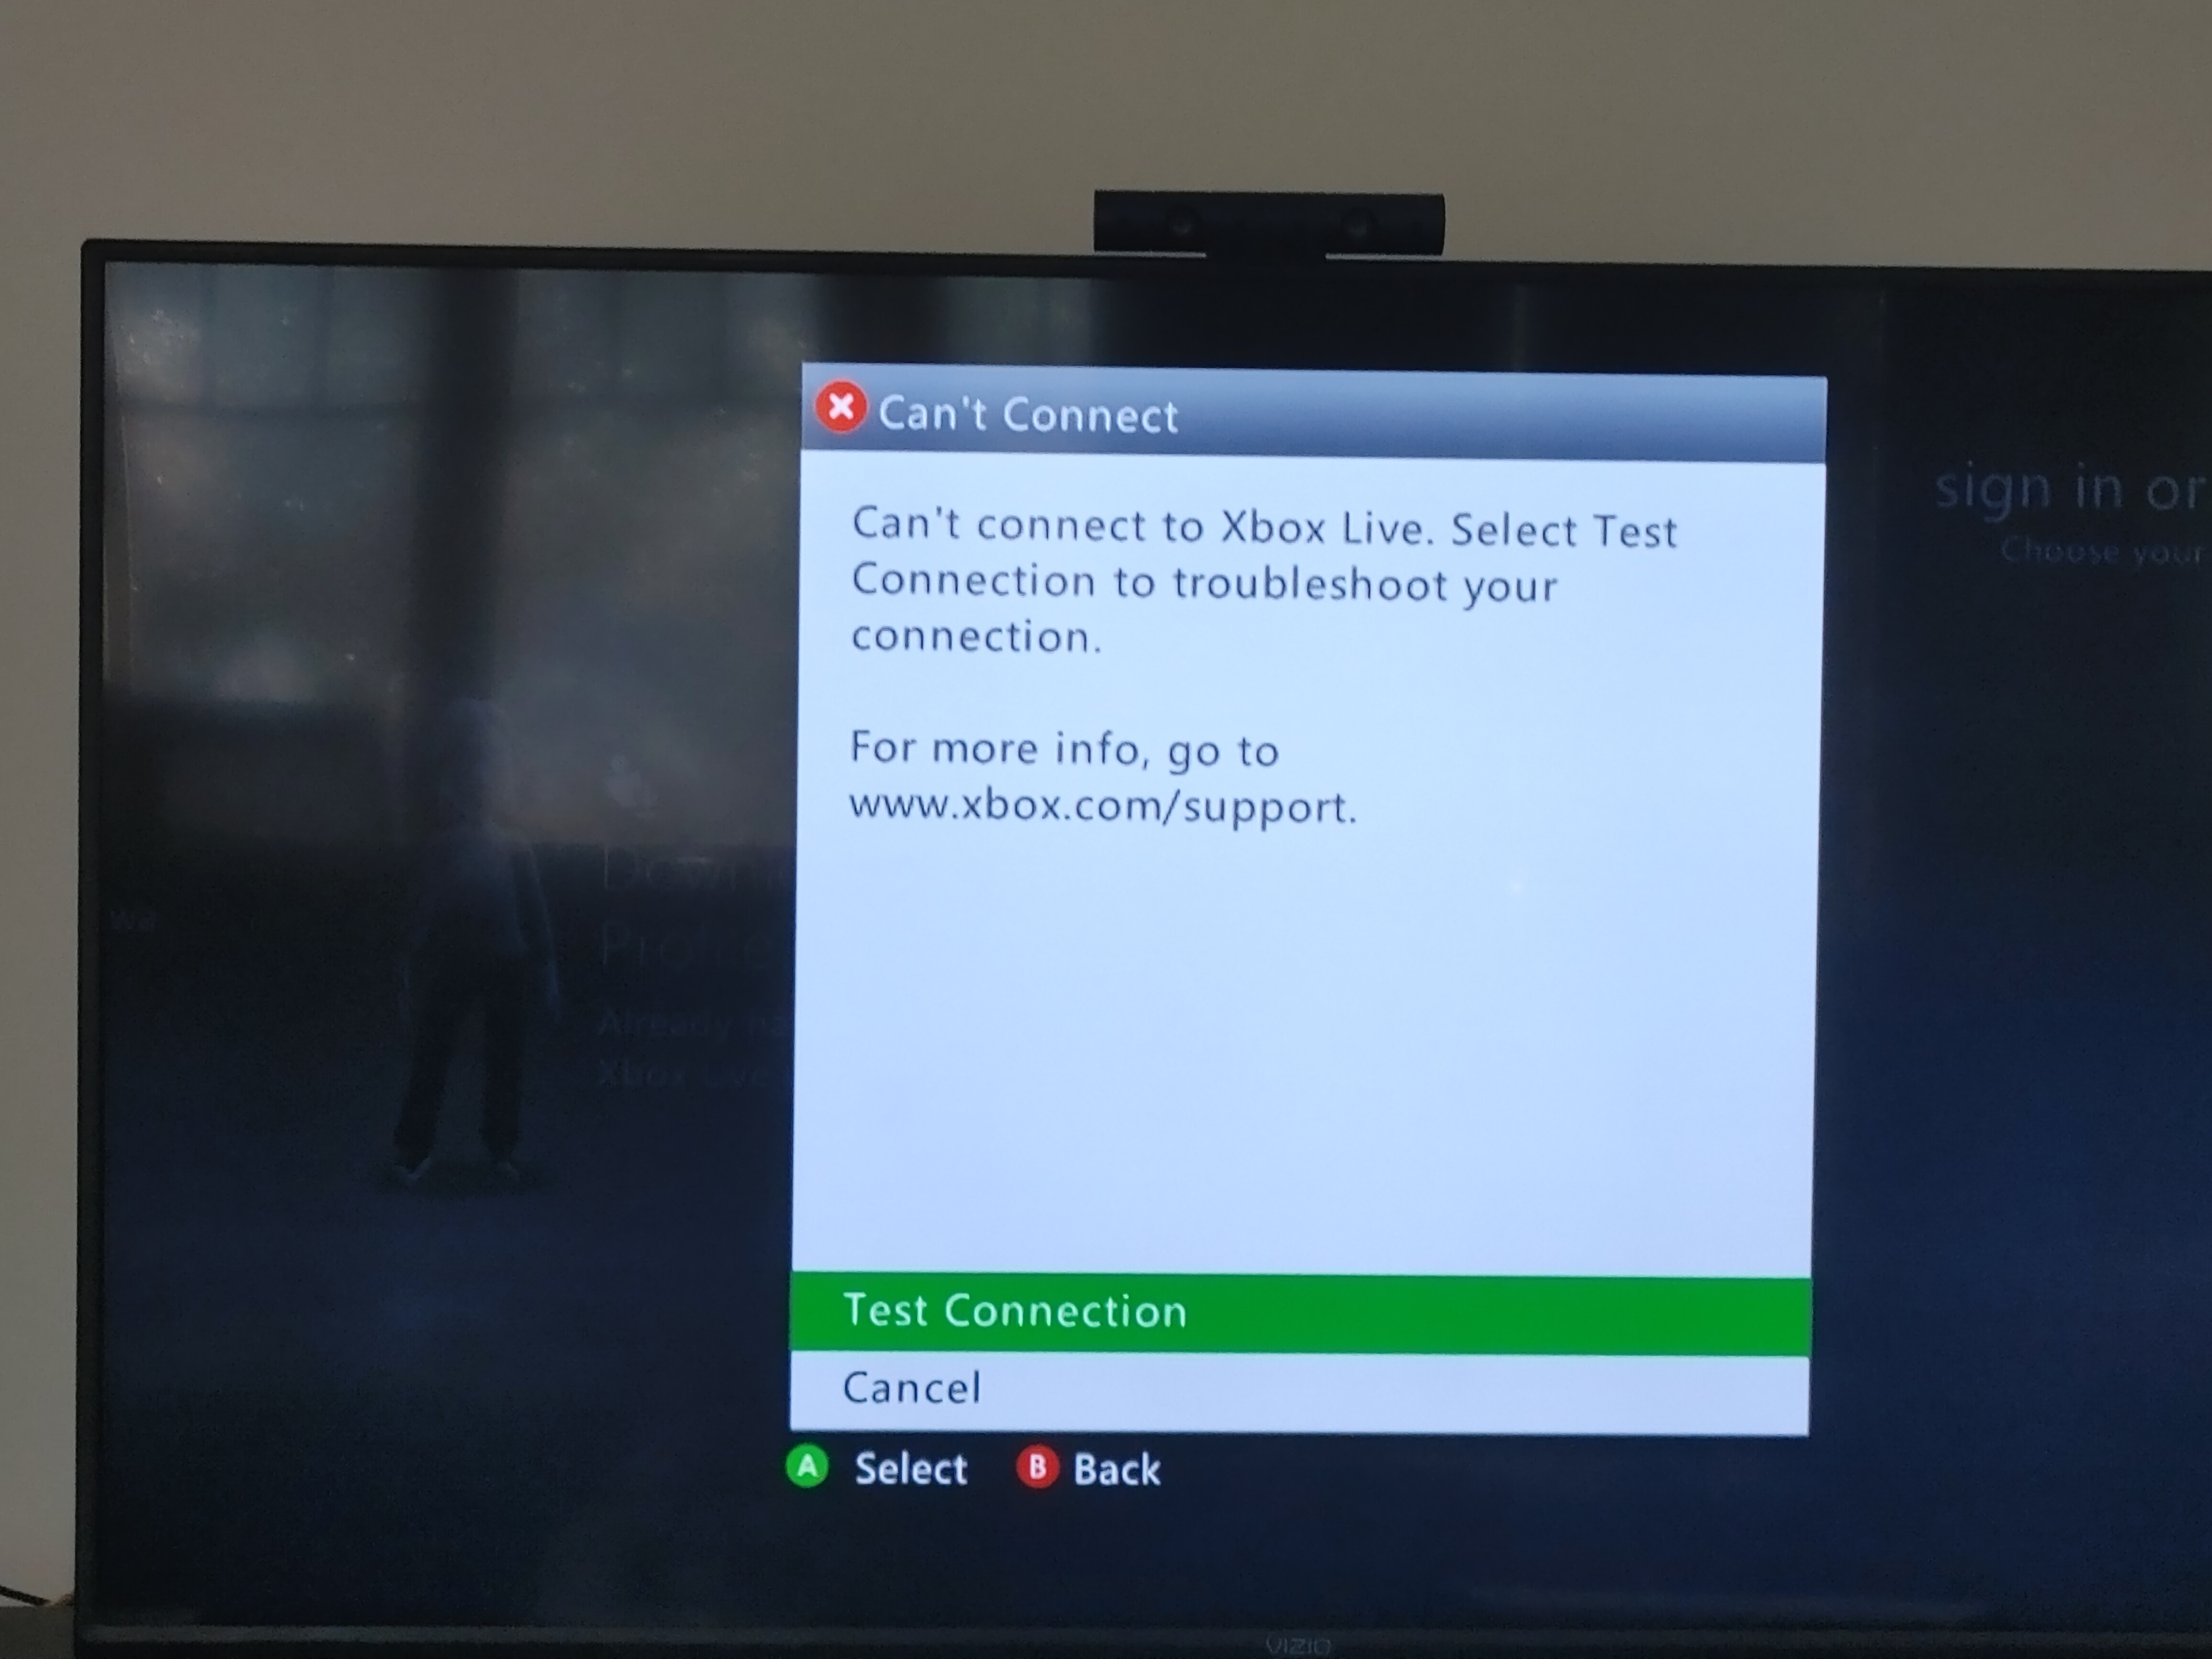 deugd boter Oneerlijkheid Xbox 360 will not sign into xbox live. Possible false console ban? -  Microsoft Community